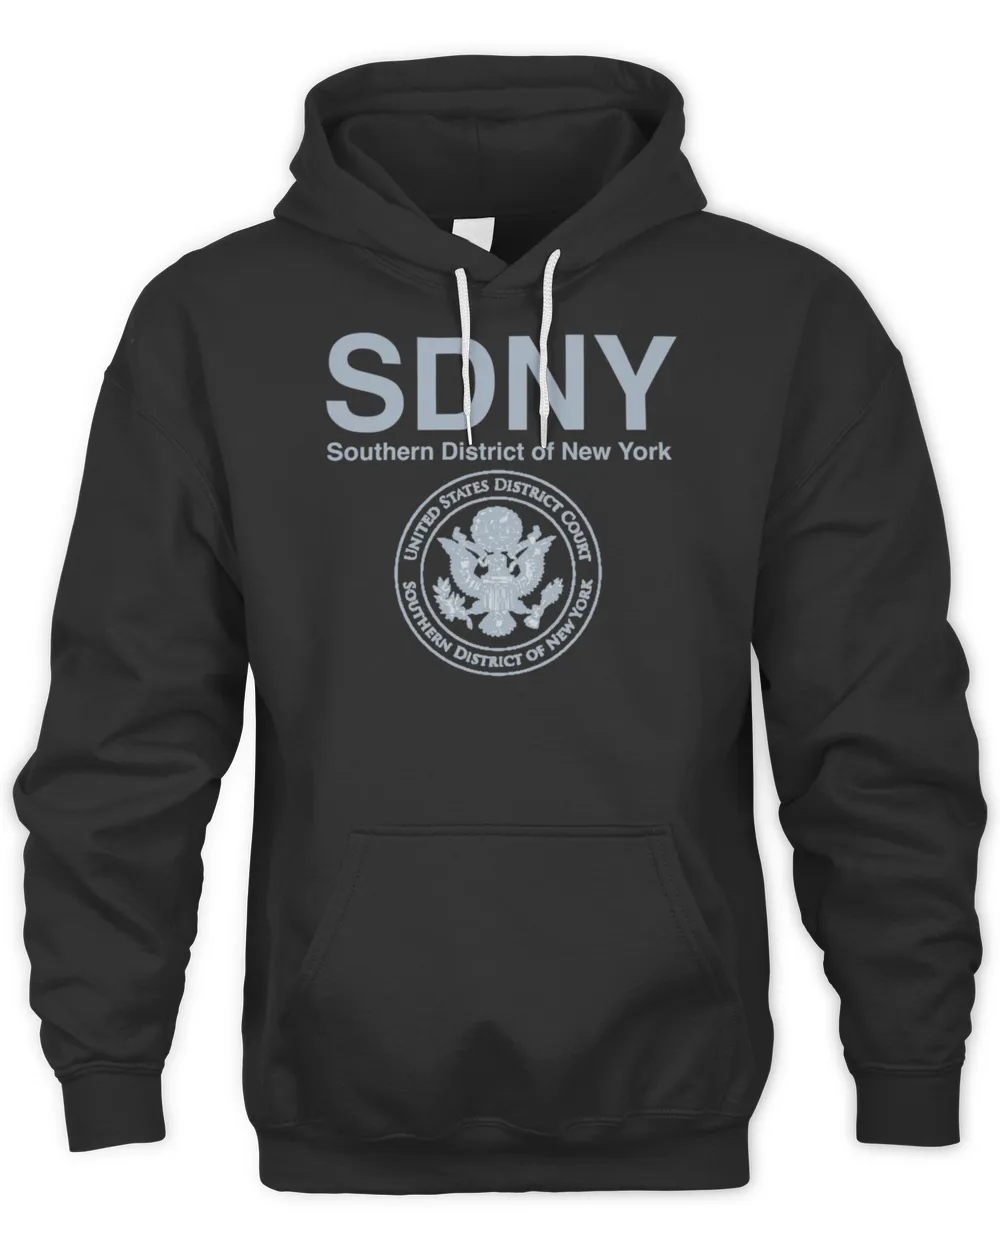 Sdny The Southern District Of New York T-Shirt